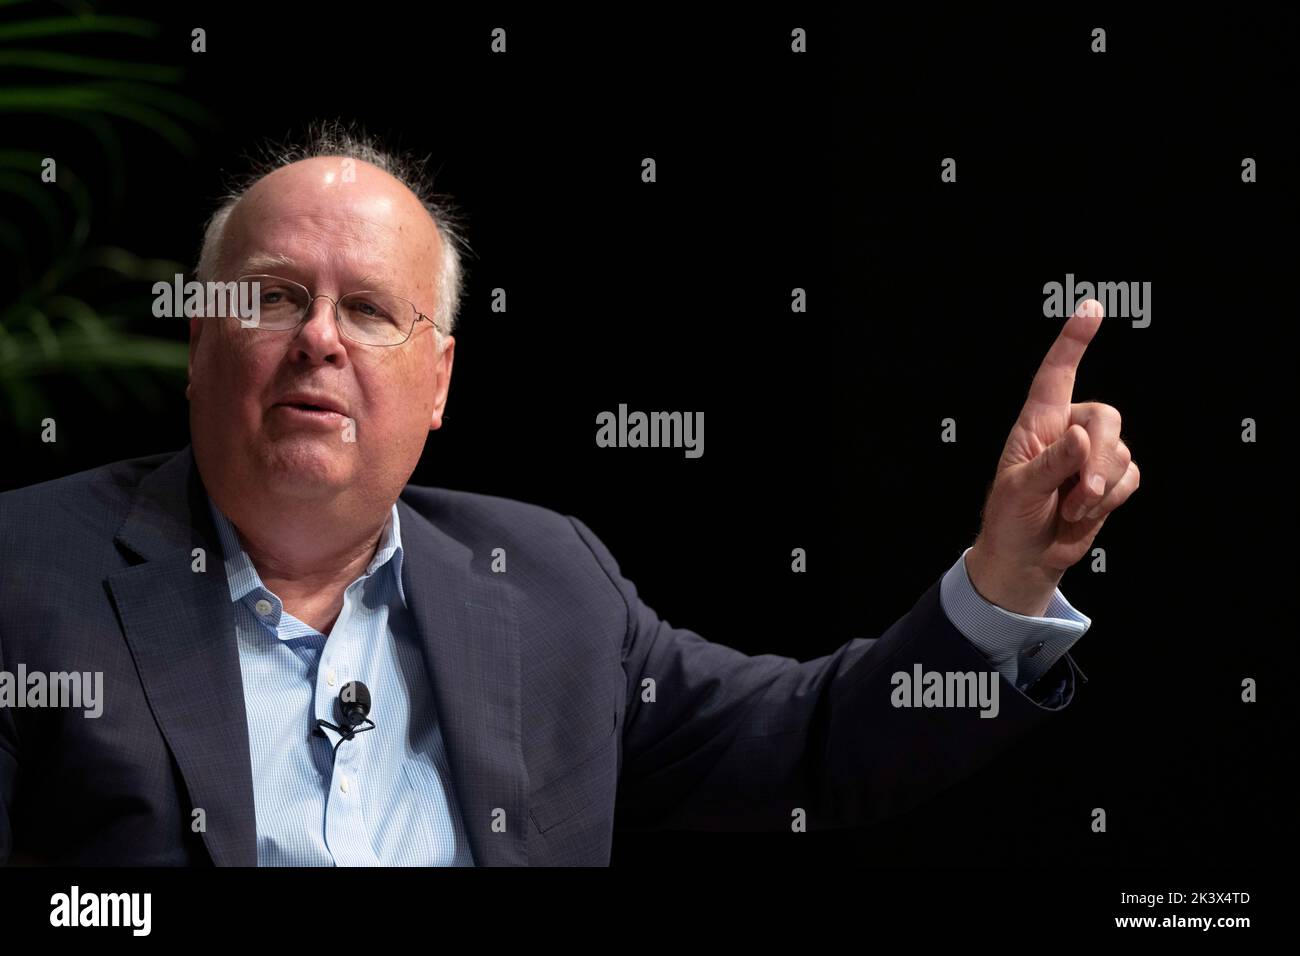 Republican political strategist KARL ROVE analyzes the upcoming midterm elections during an interview session at the annual Texas Tribune Festival in downtown Austin on September 24, 2022.  Rove is a former White House deputy chief of staff in the Bush administration. Stock Photo